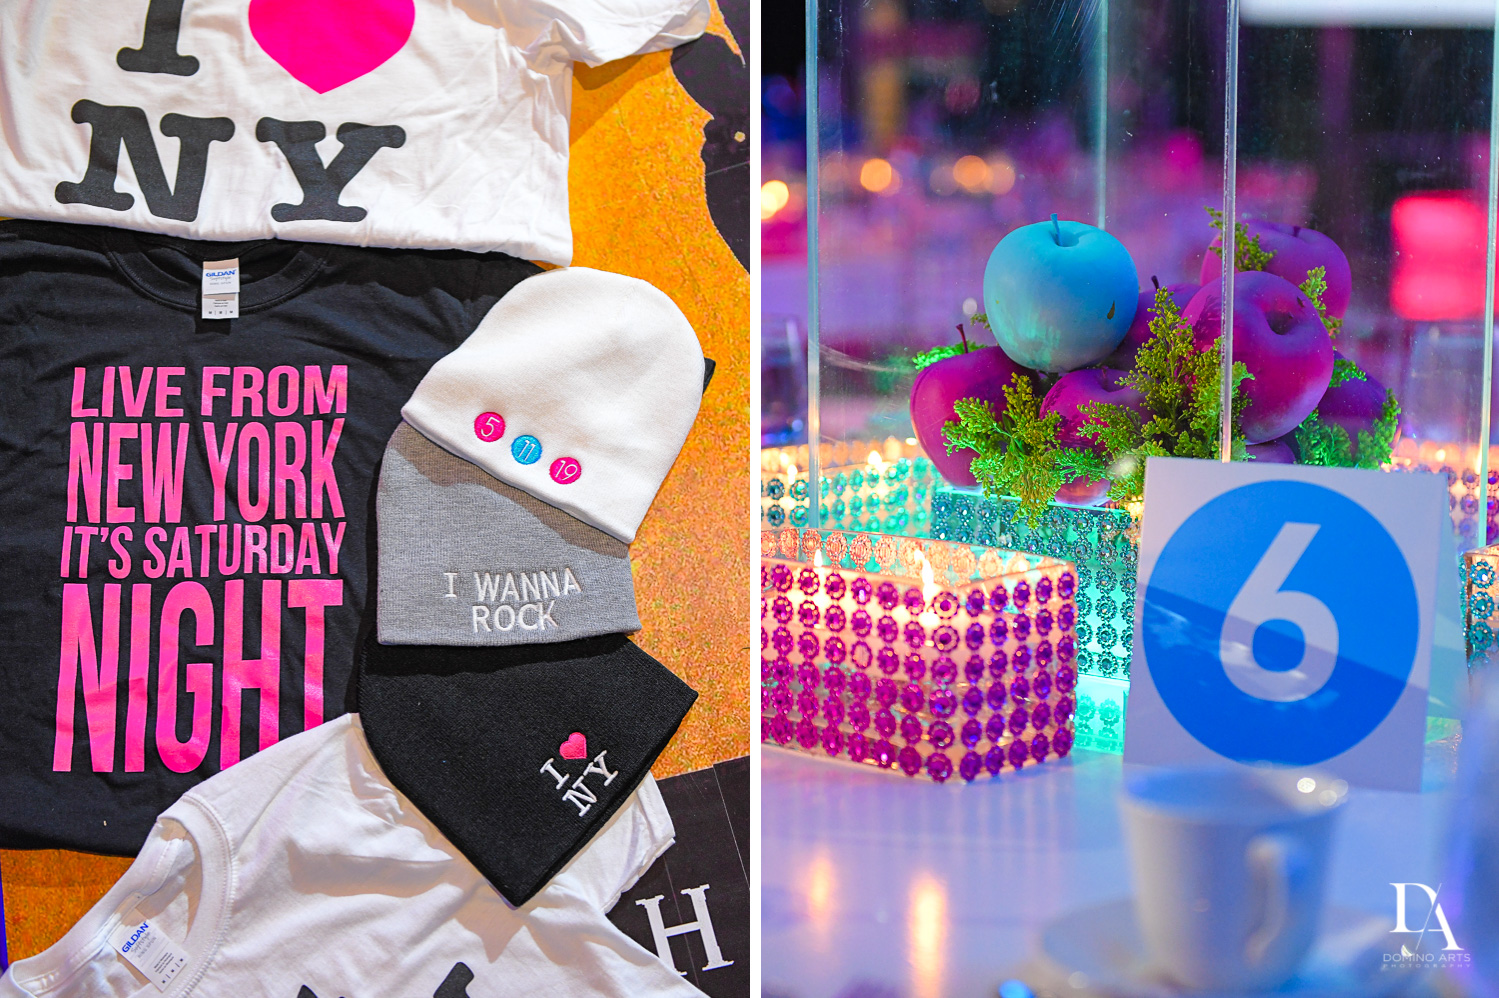 party favors at New York Theme Bat Mitzvah at Woodfield Country Club, Boca Raton by Domino Arts Photography